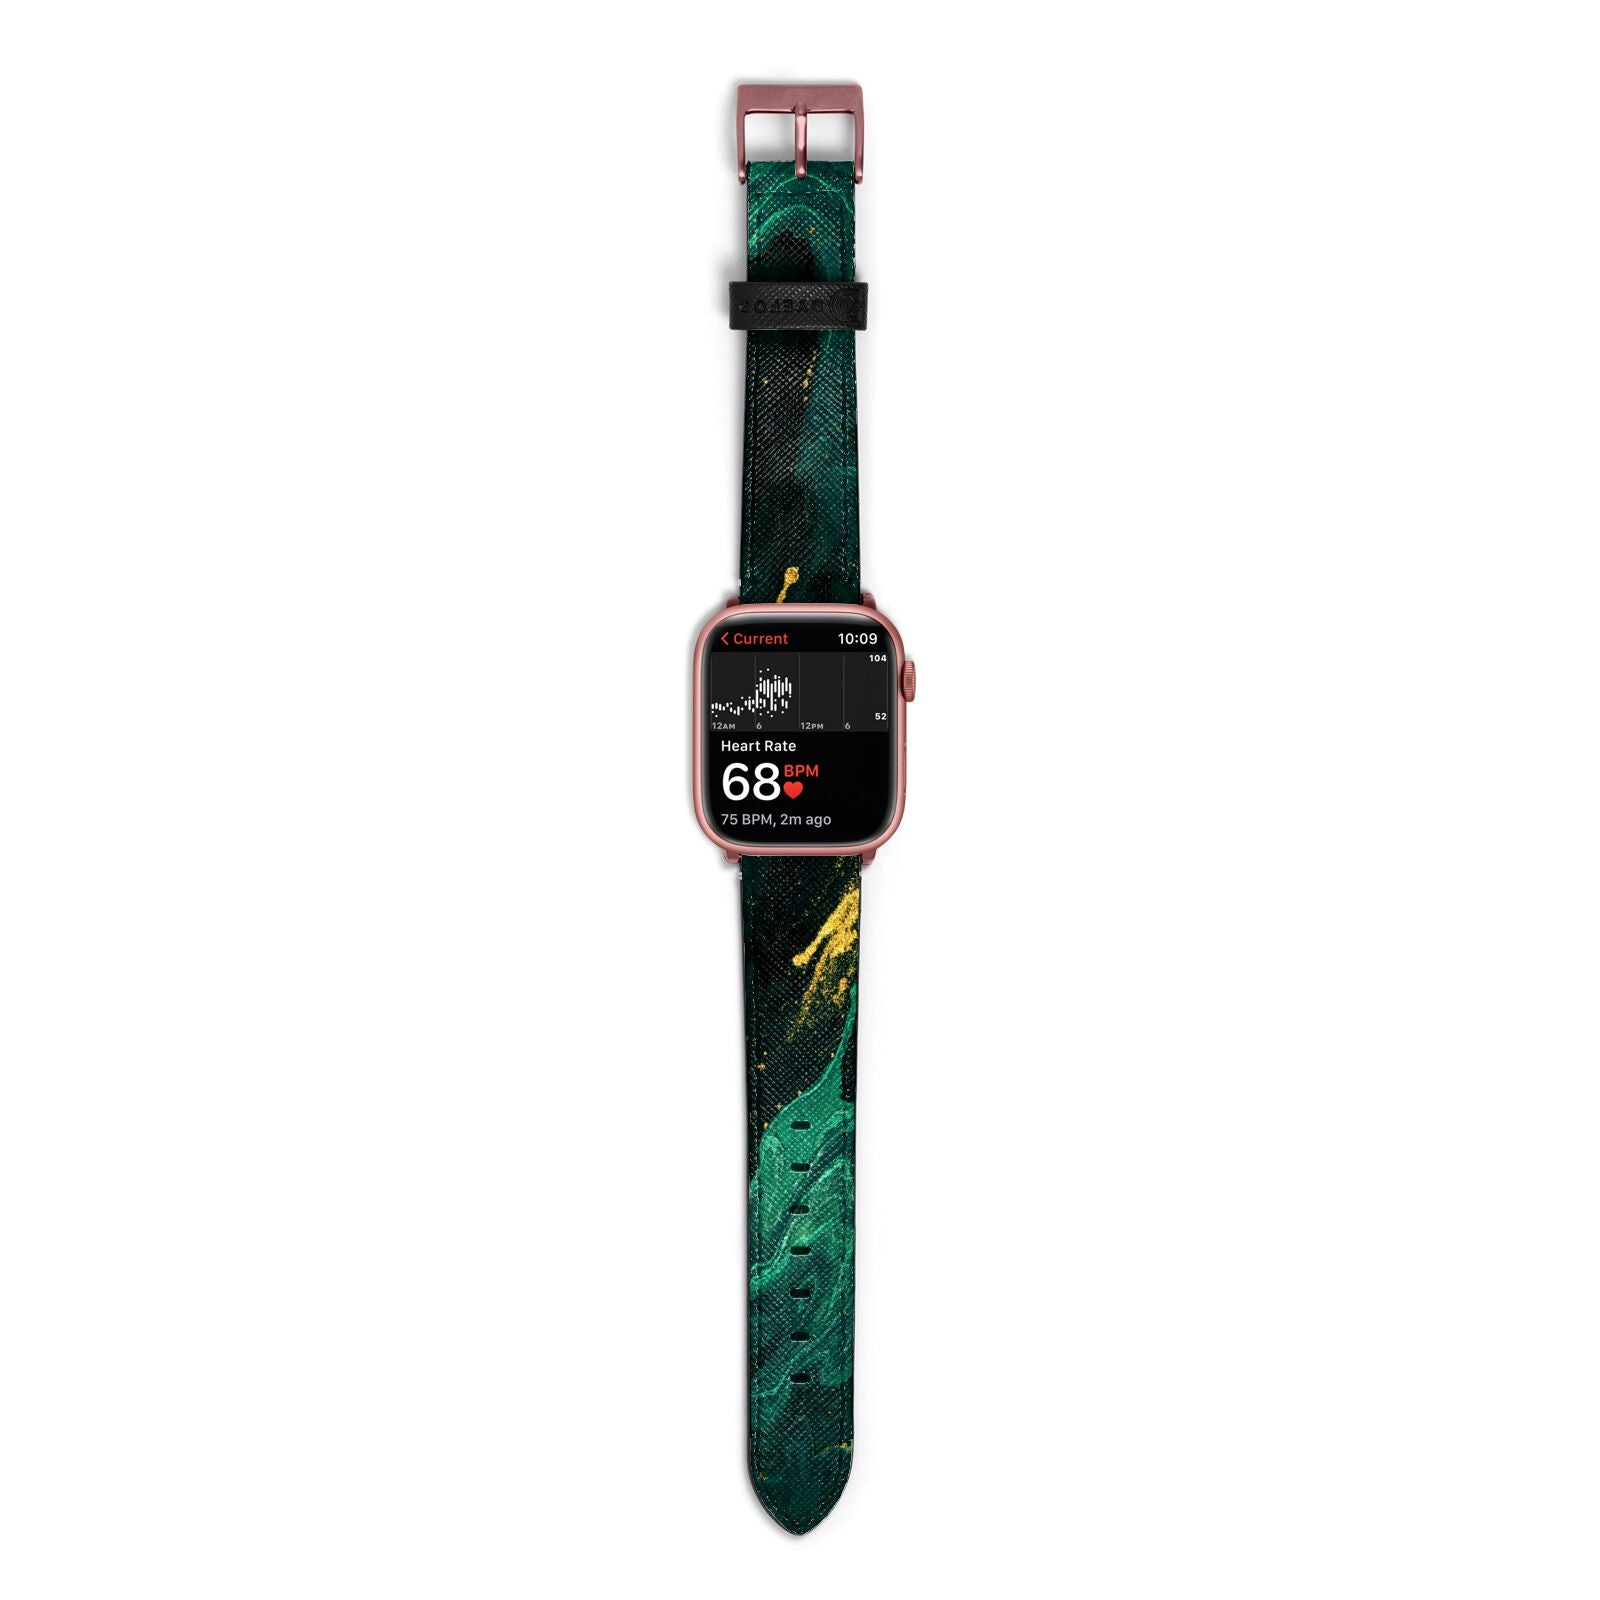 Emerald Green Apple Watch Strap Size 38mm with Rose Gold Hardware